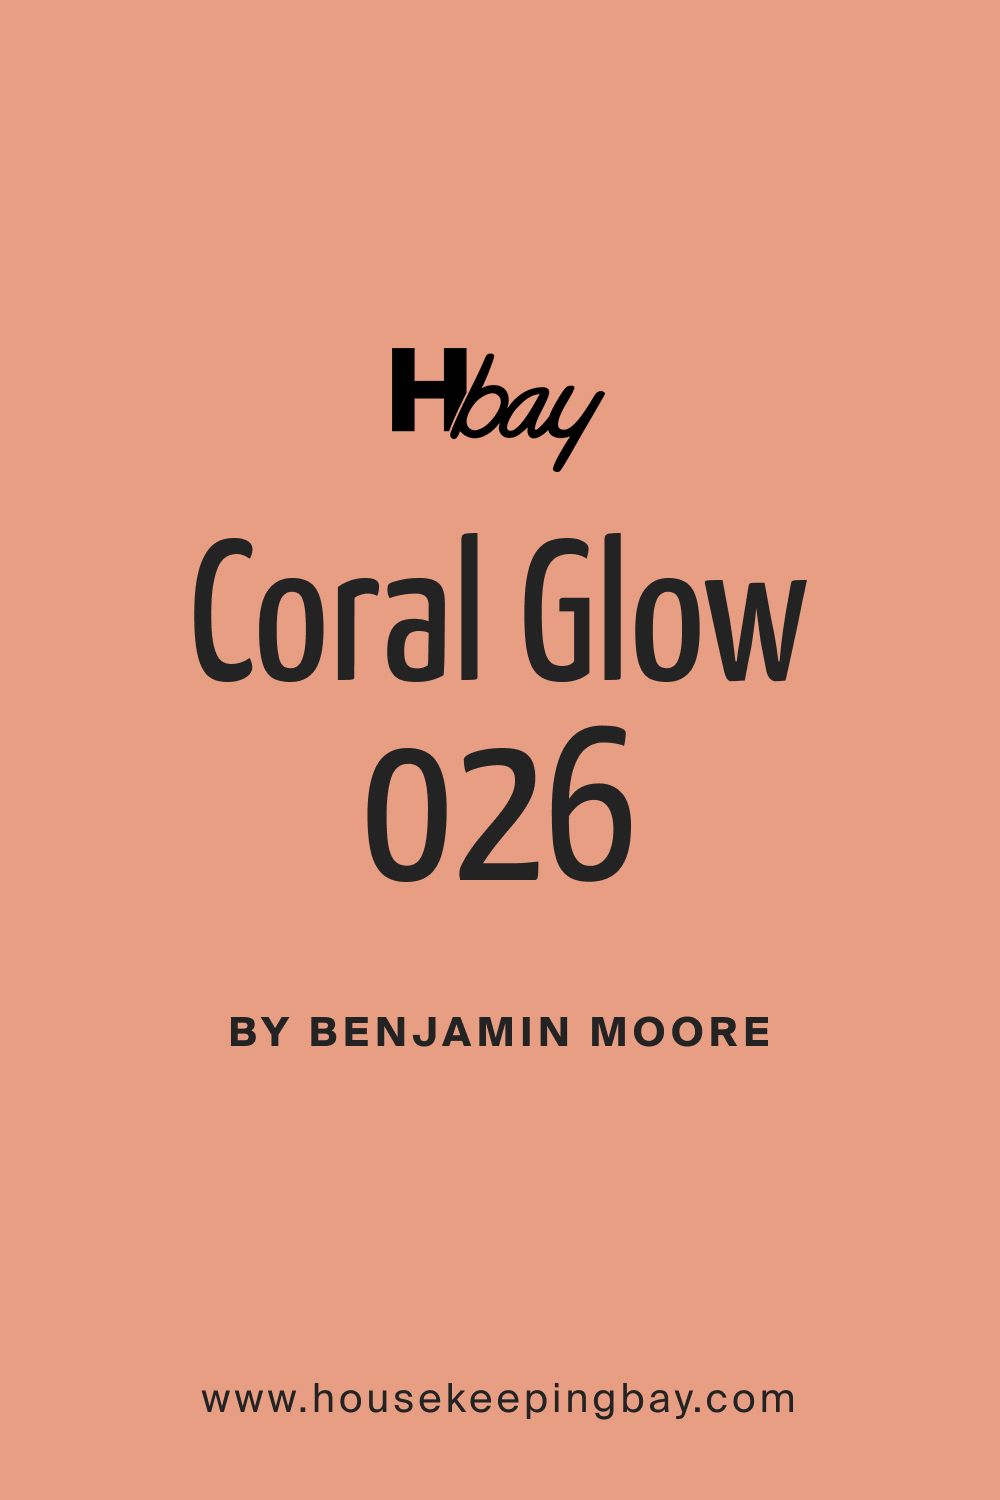 Coral Glow 026 Paint Color by Benjamin Moore